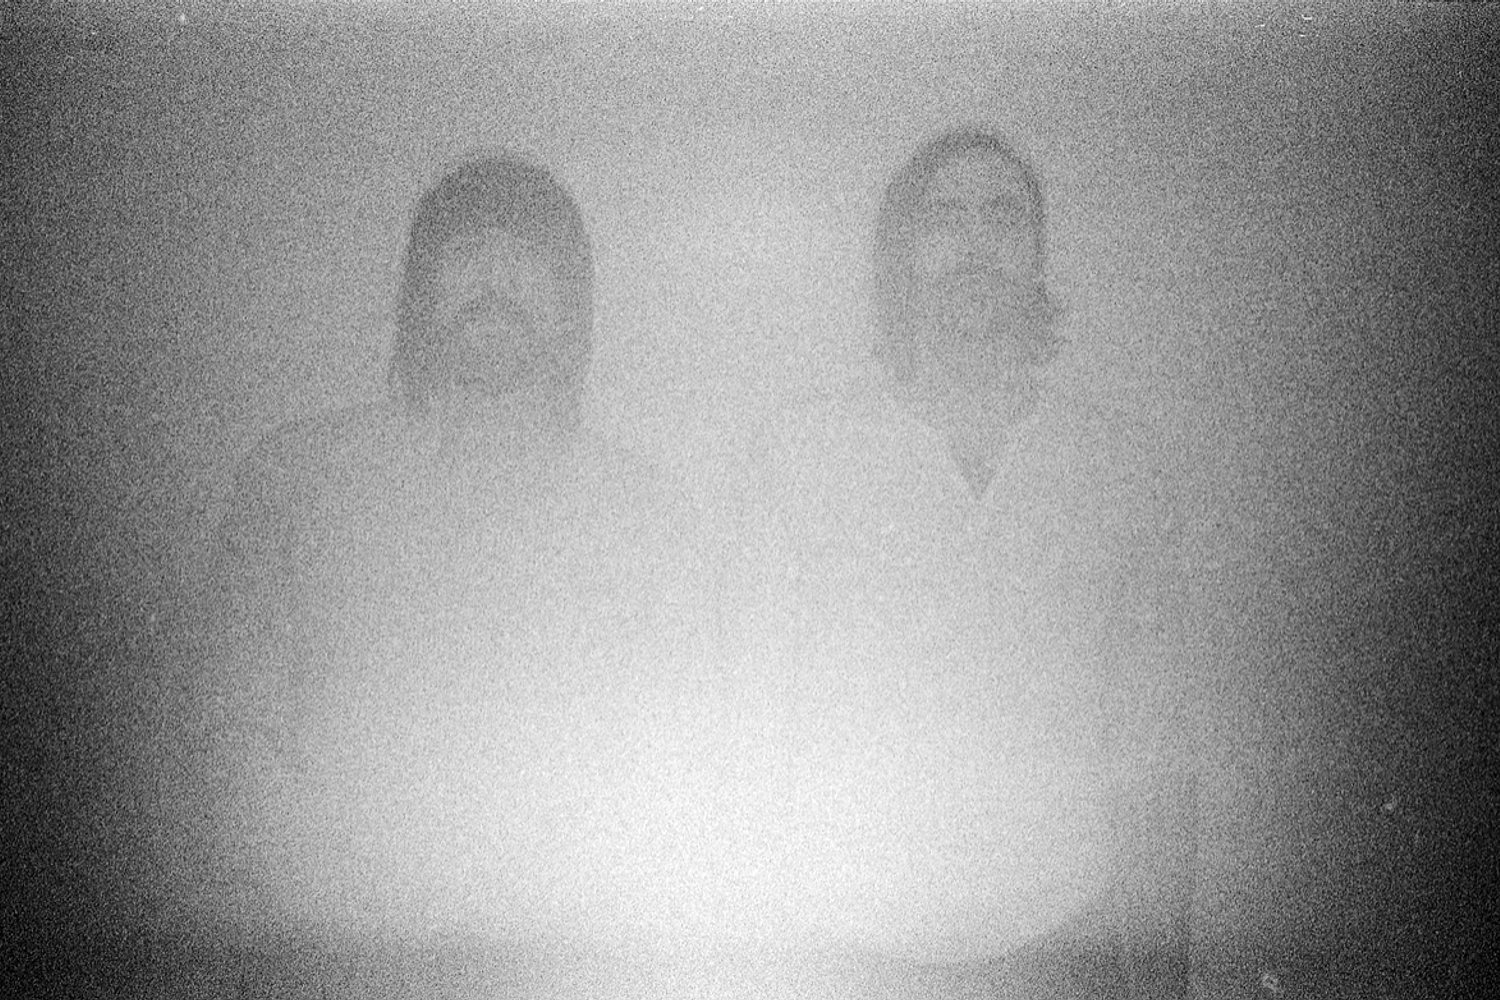 Death From Above 1979: “We needed to see if there were real fans out there”